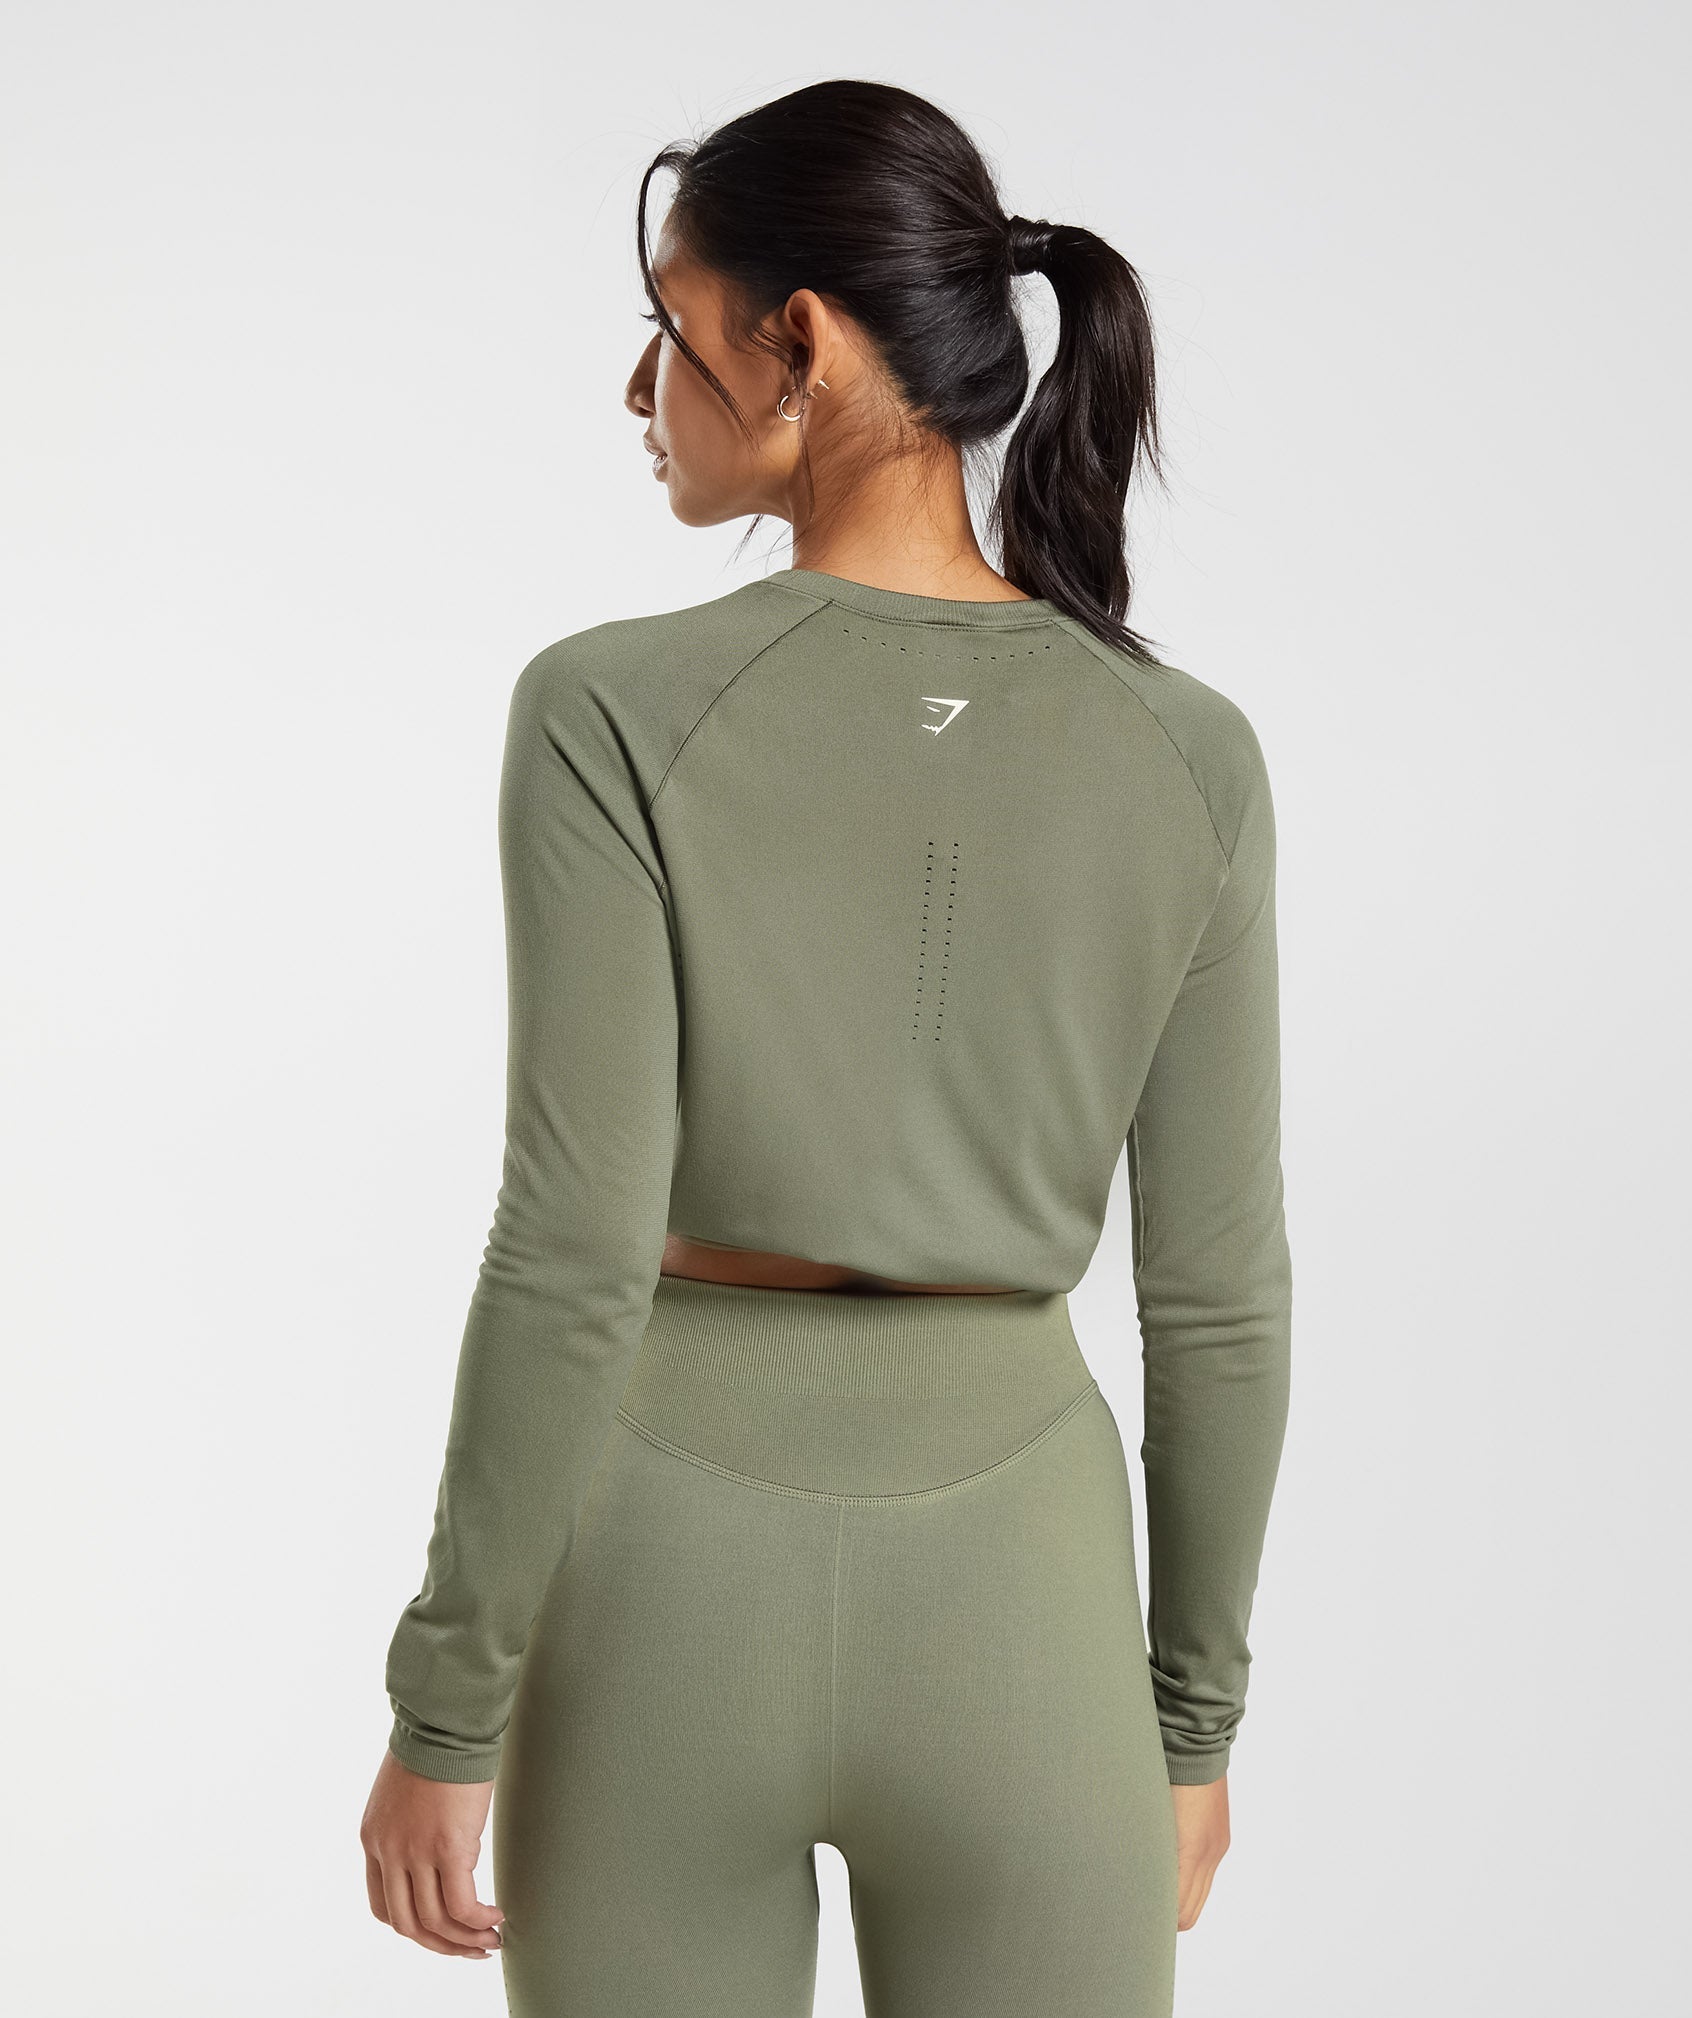 Sweat Seamless Long Sleeve Crop Top in Dusty Olive - view 2